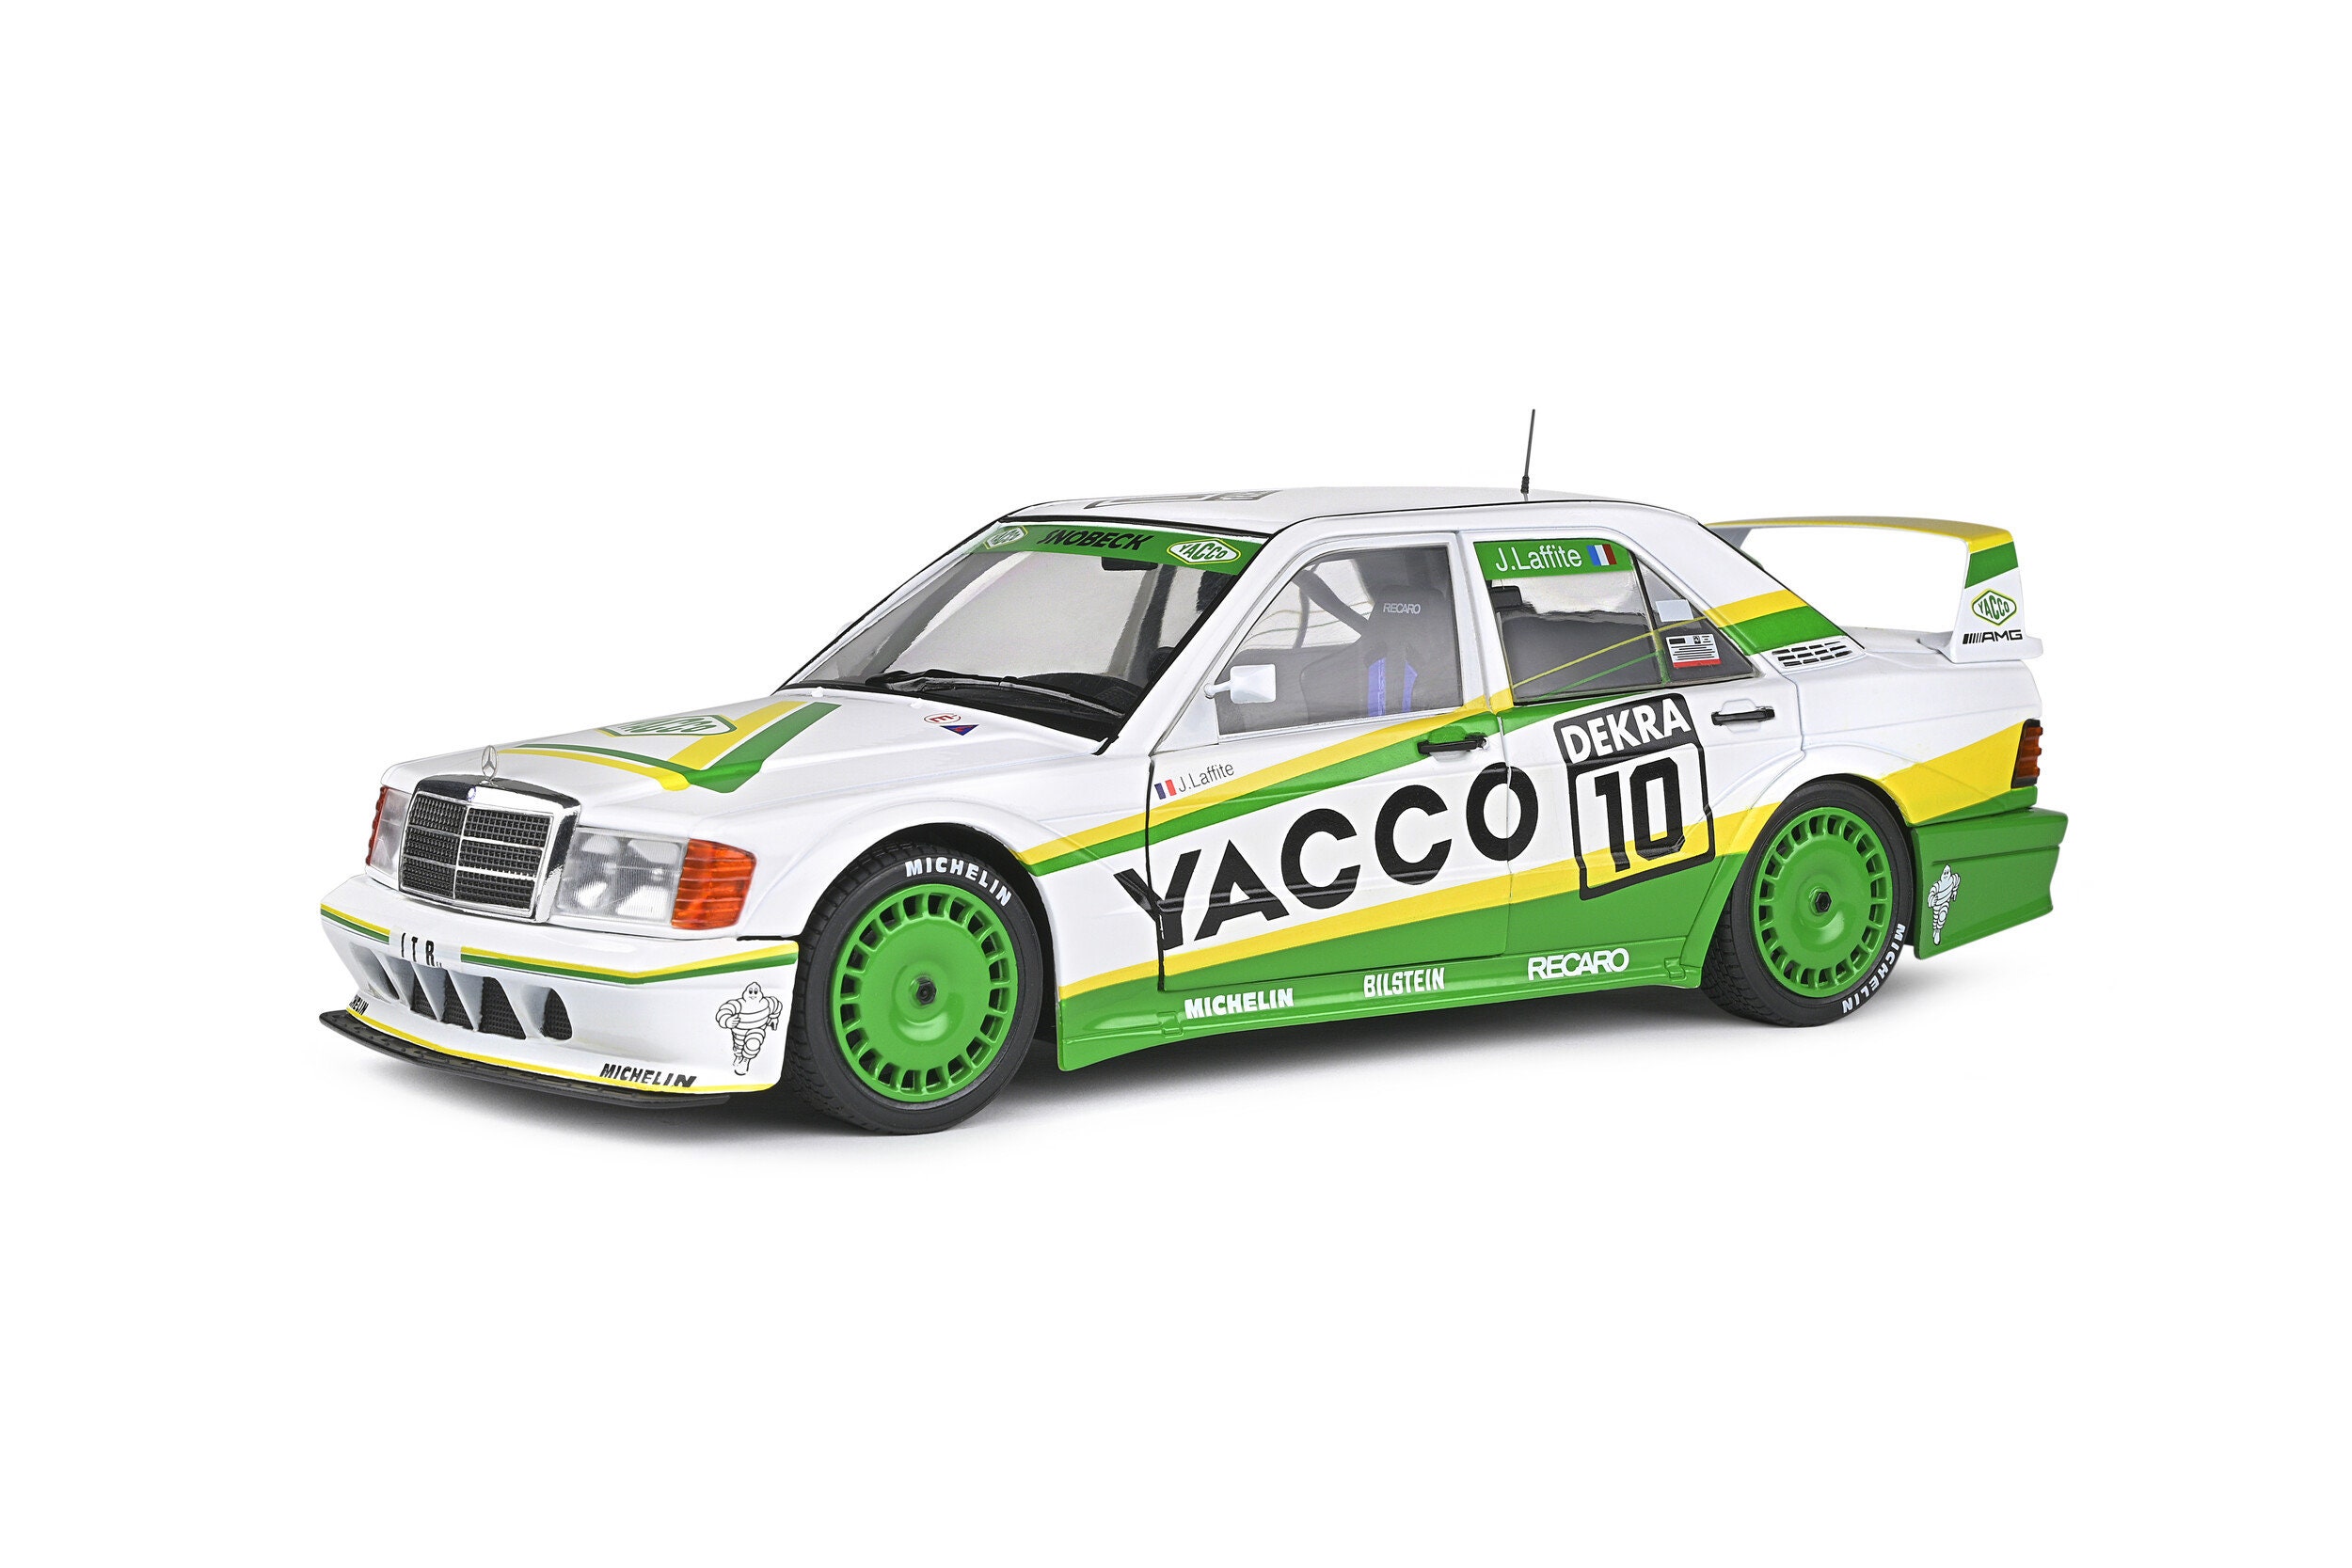 Large 1:18 scale Solido Model of a Mrecedes Benz 190 DTM - Etsy 日本